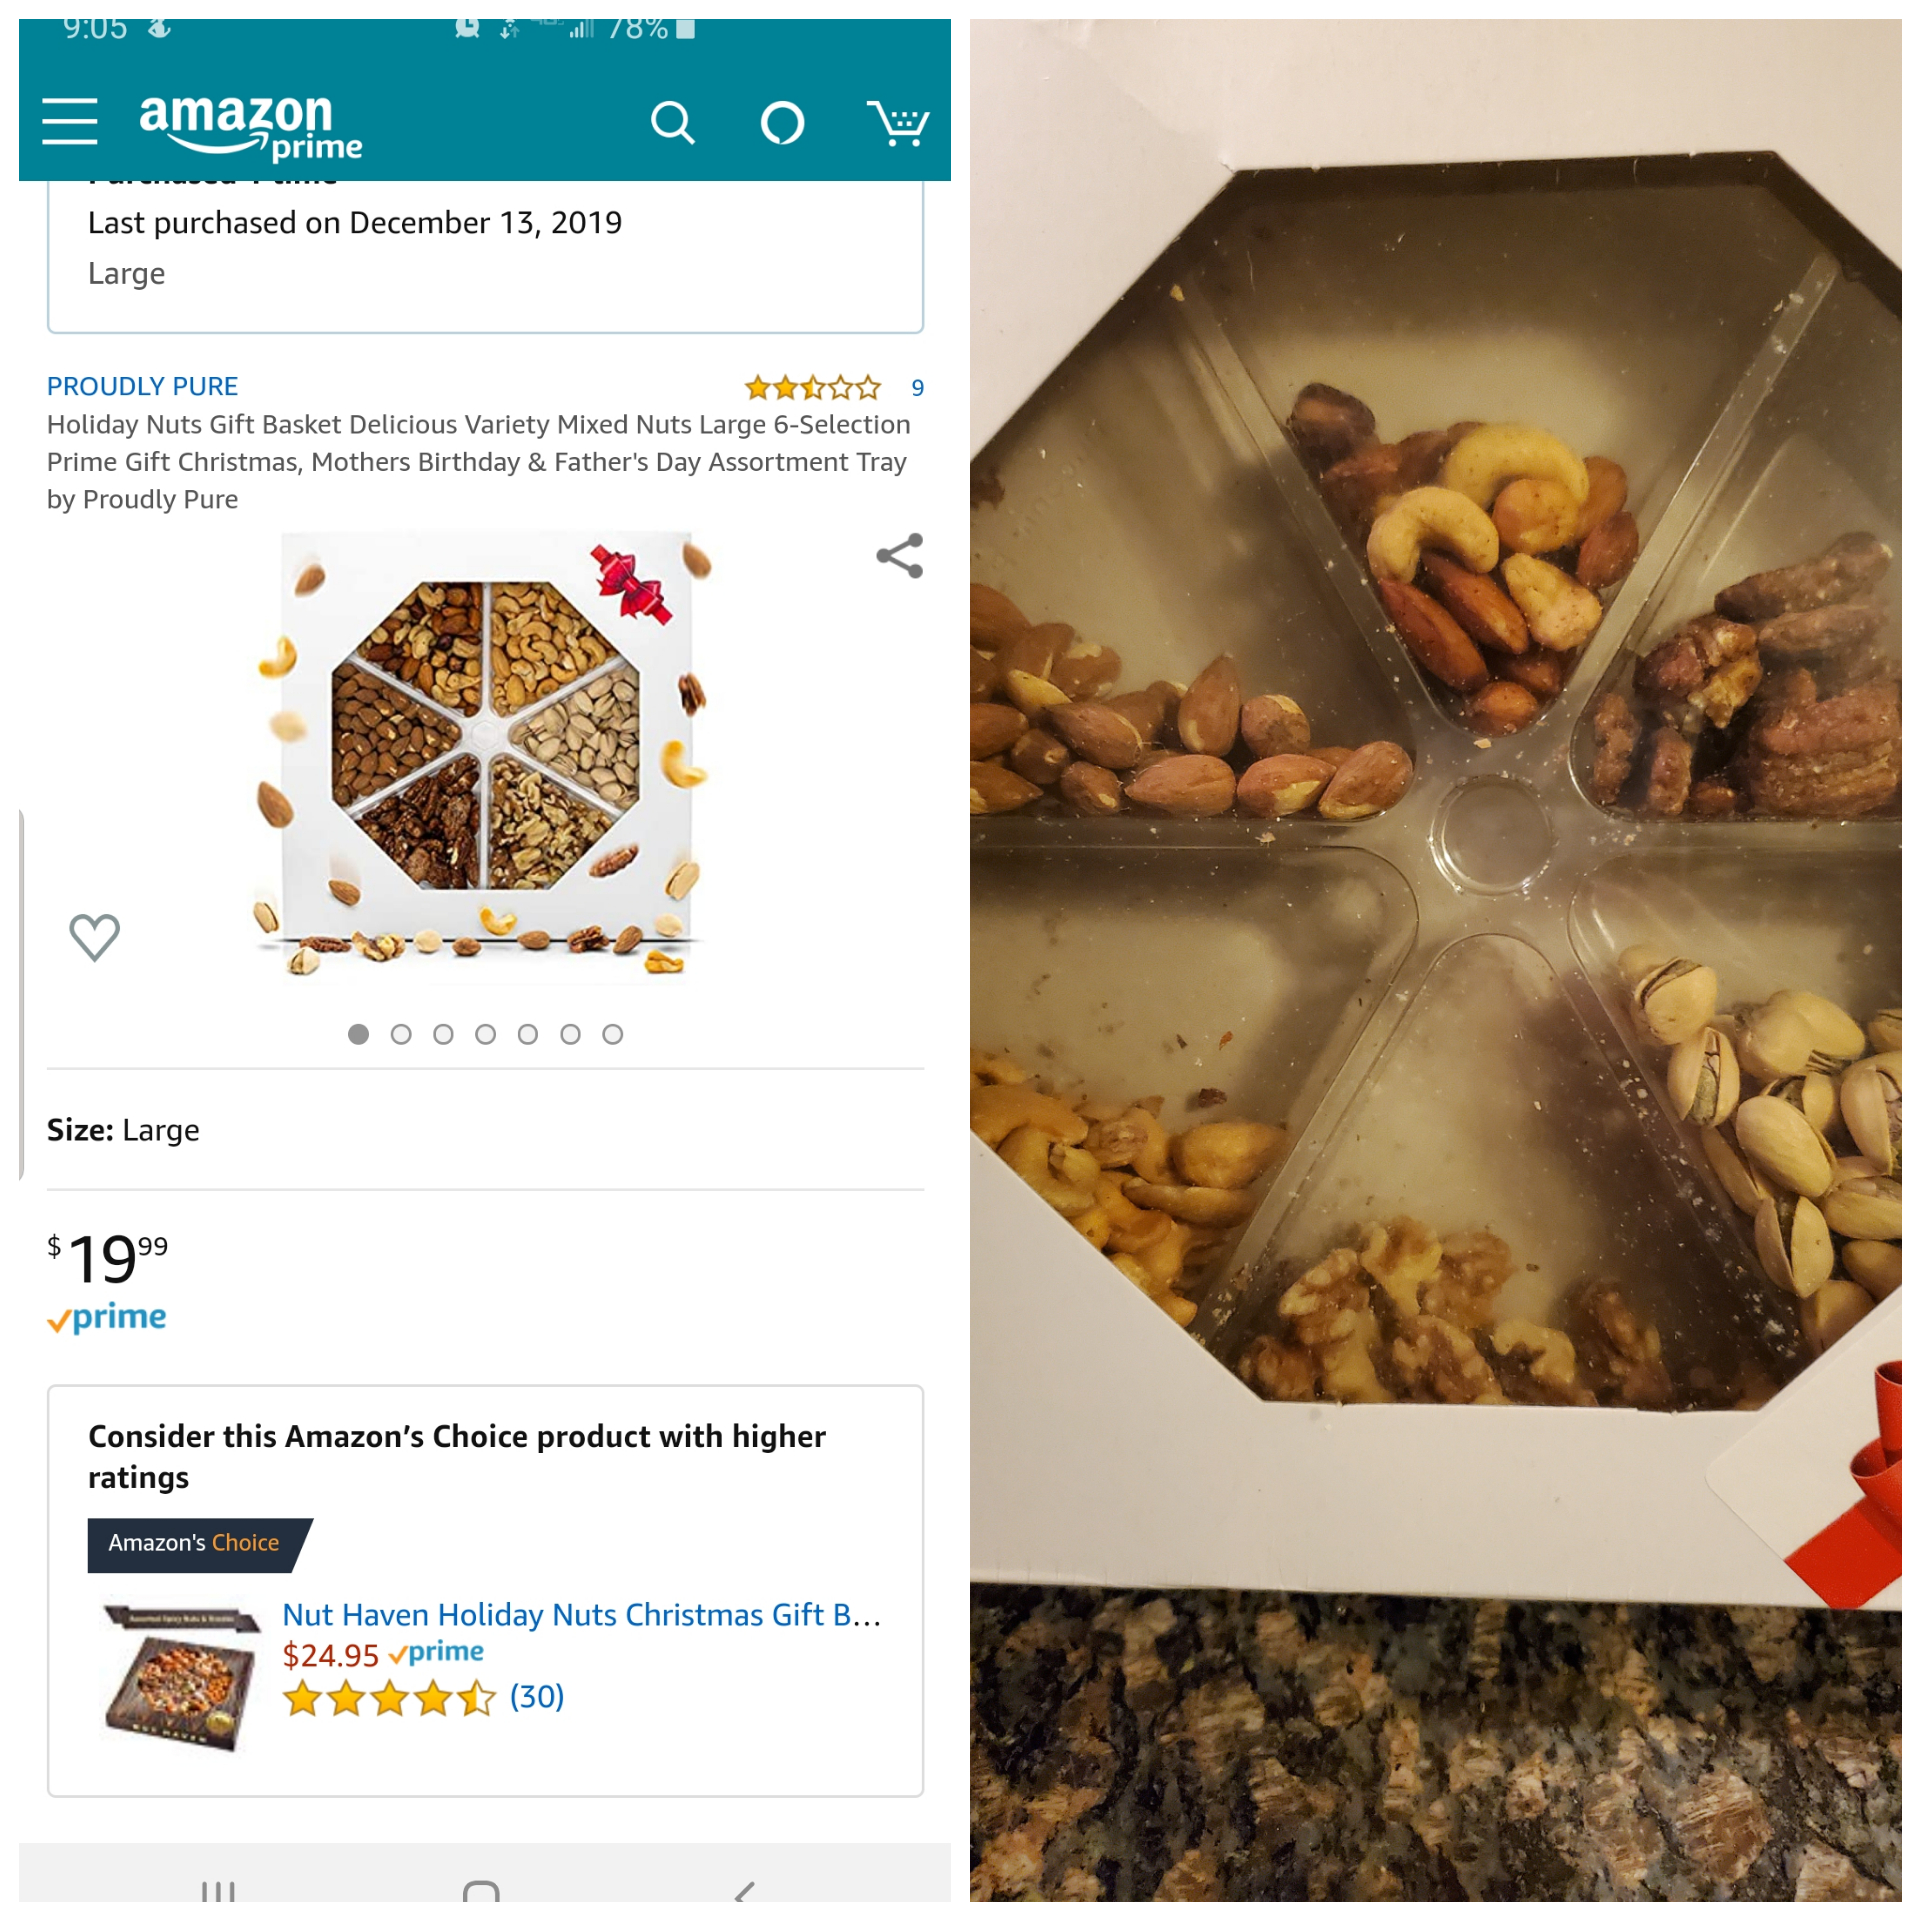 recipe - a on amazon prime Last purchased on Large Proudly Pure Holiday Nuts Gift Basket Delicious Varety Mixed Nuts Large 6Selection Prime Gift Christmas, Mothers Birthday & Father's Day Assortment Tray by Proudly Pure Ooooooo Size Large $1999 prime Cons